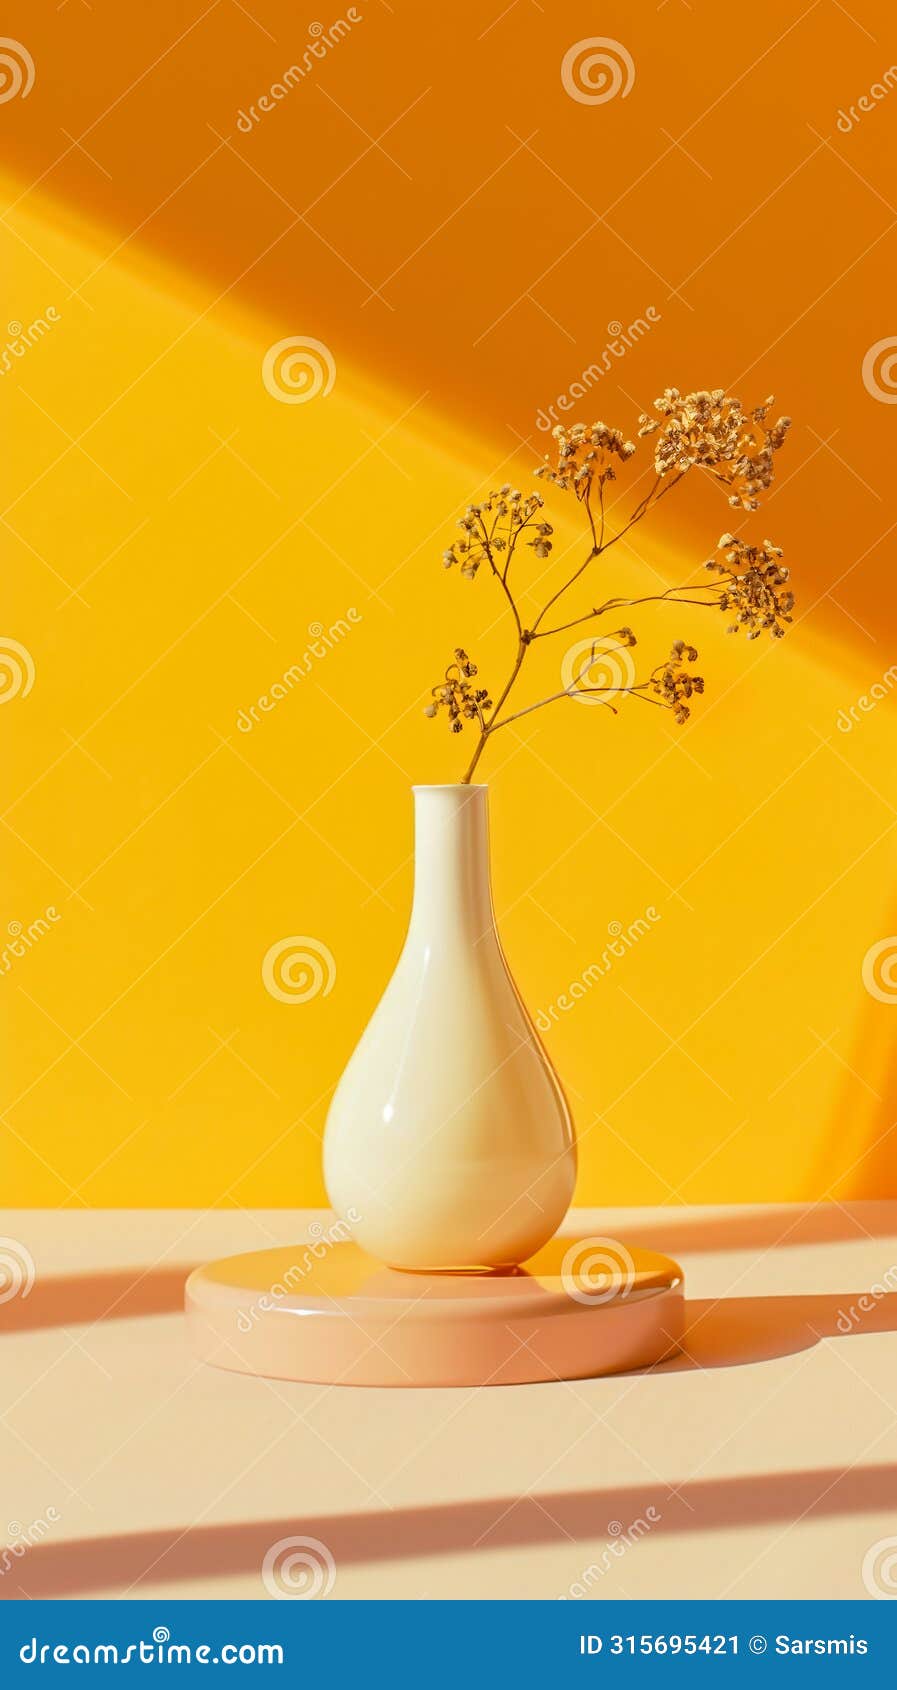 minimalist vase with delicate dried flowers on a vibrant yellow background